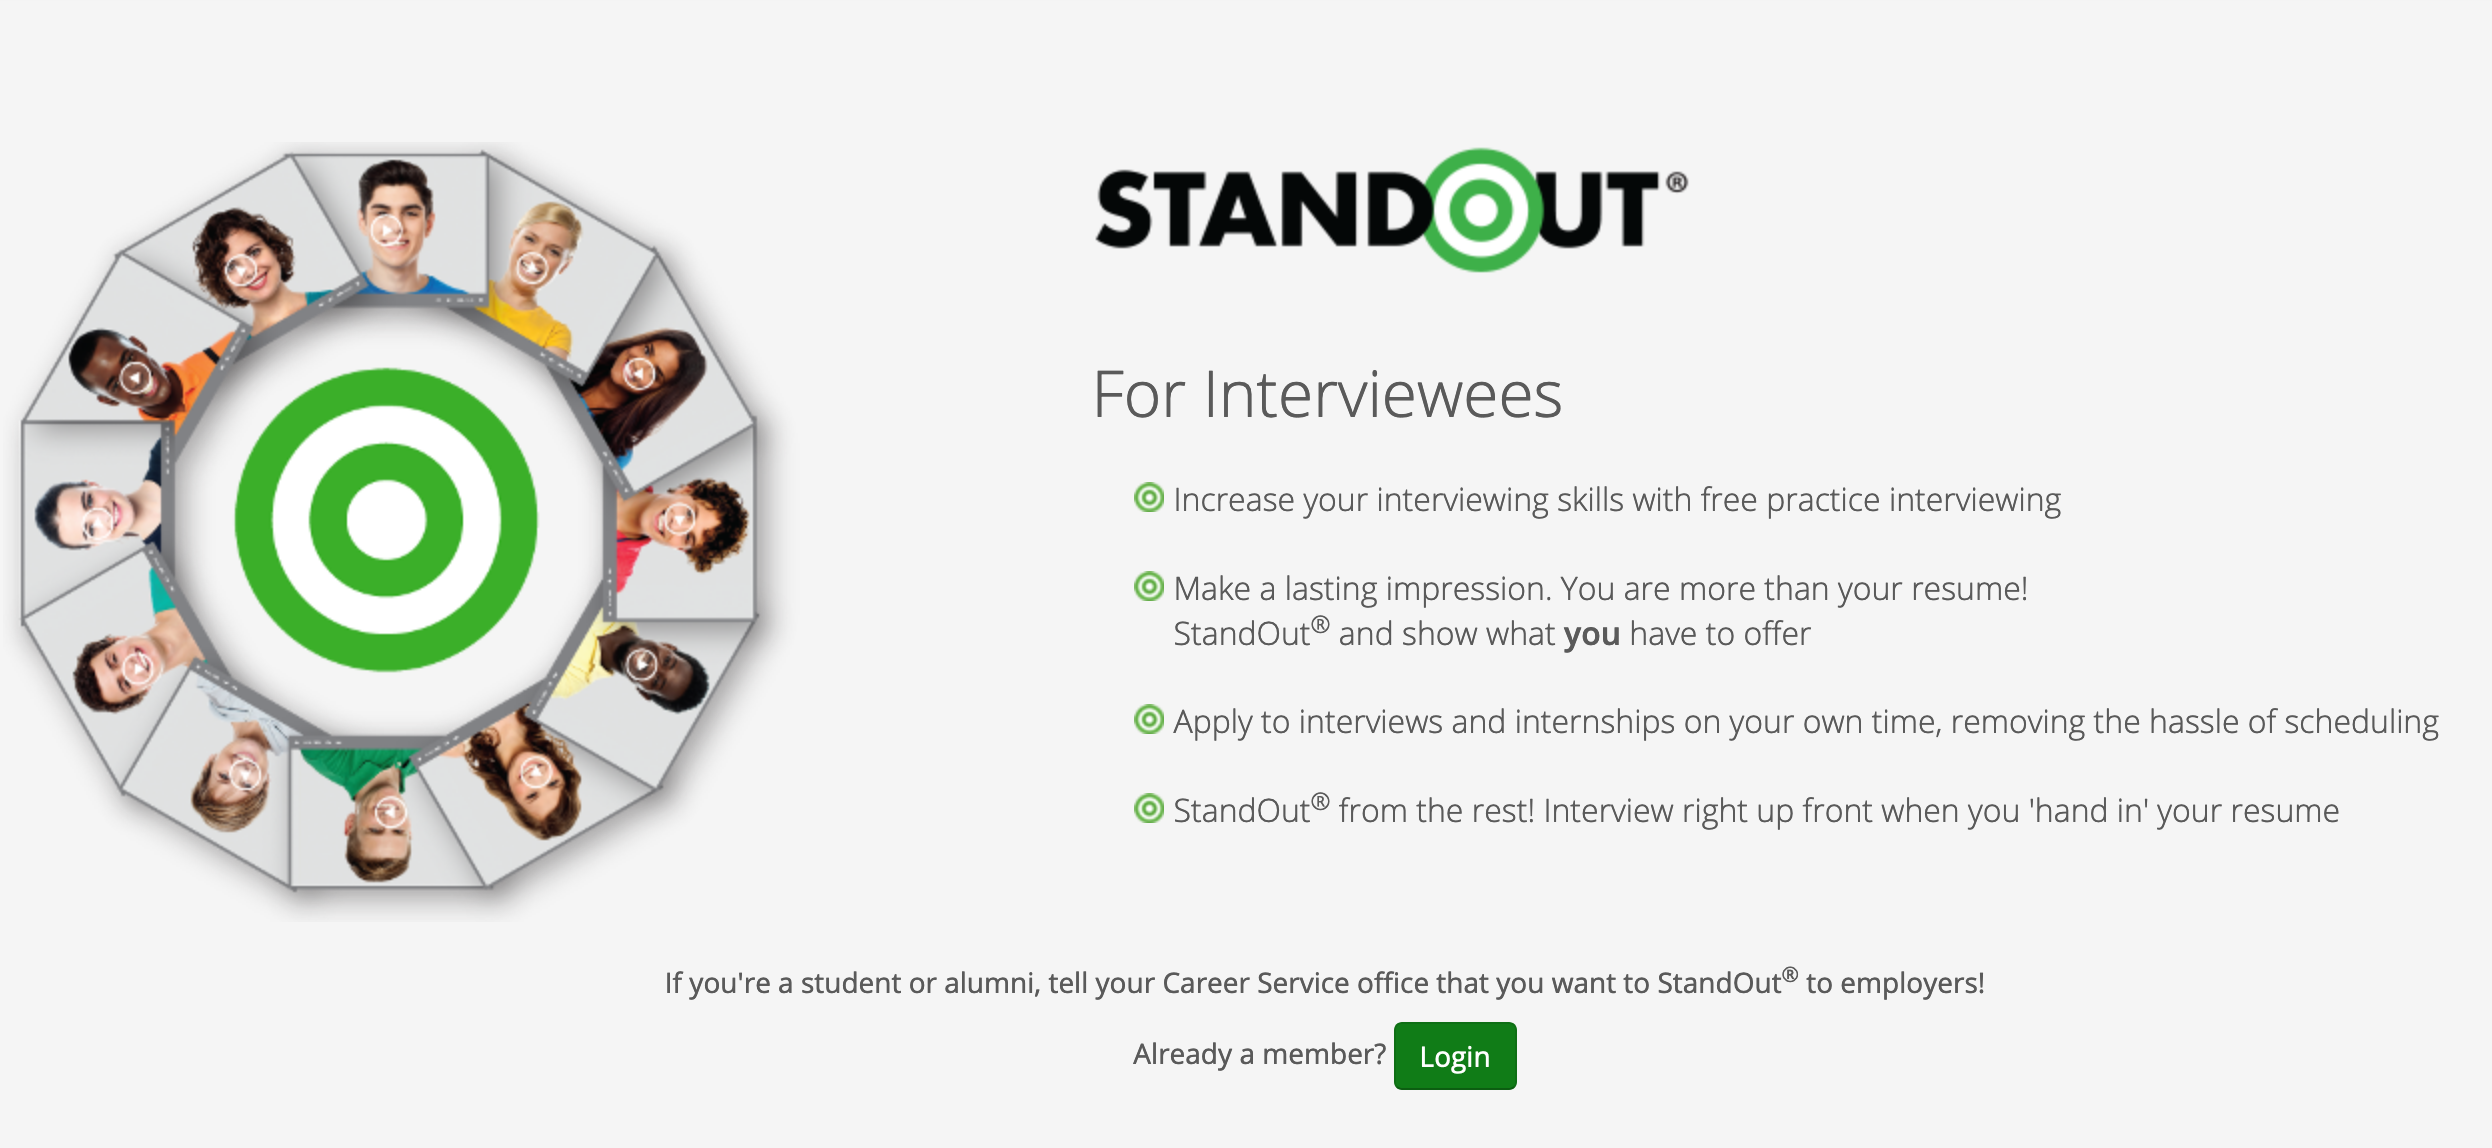 image of standout, the mock interview tool